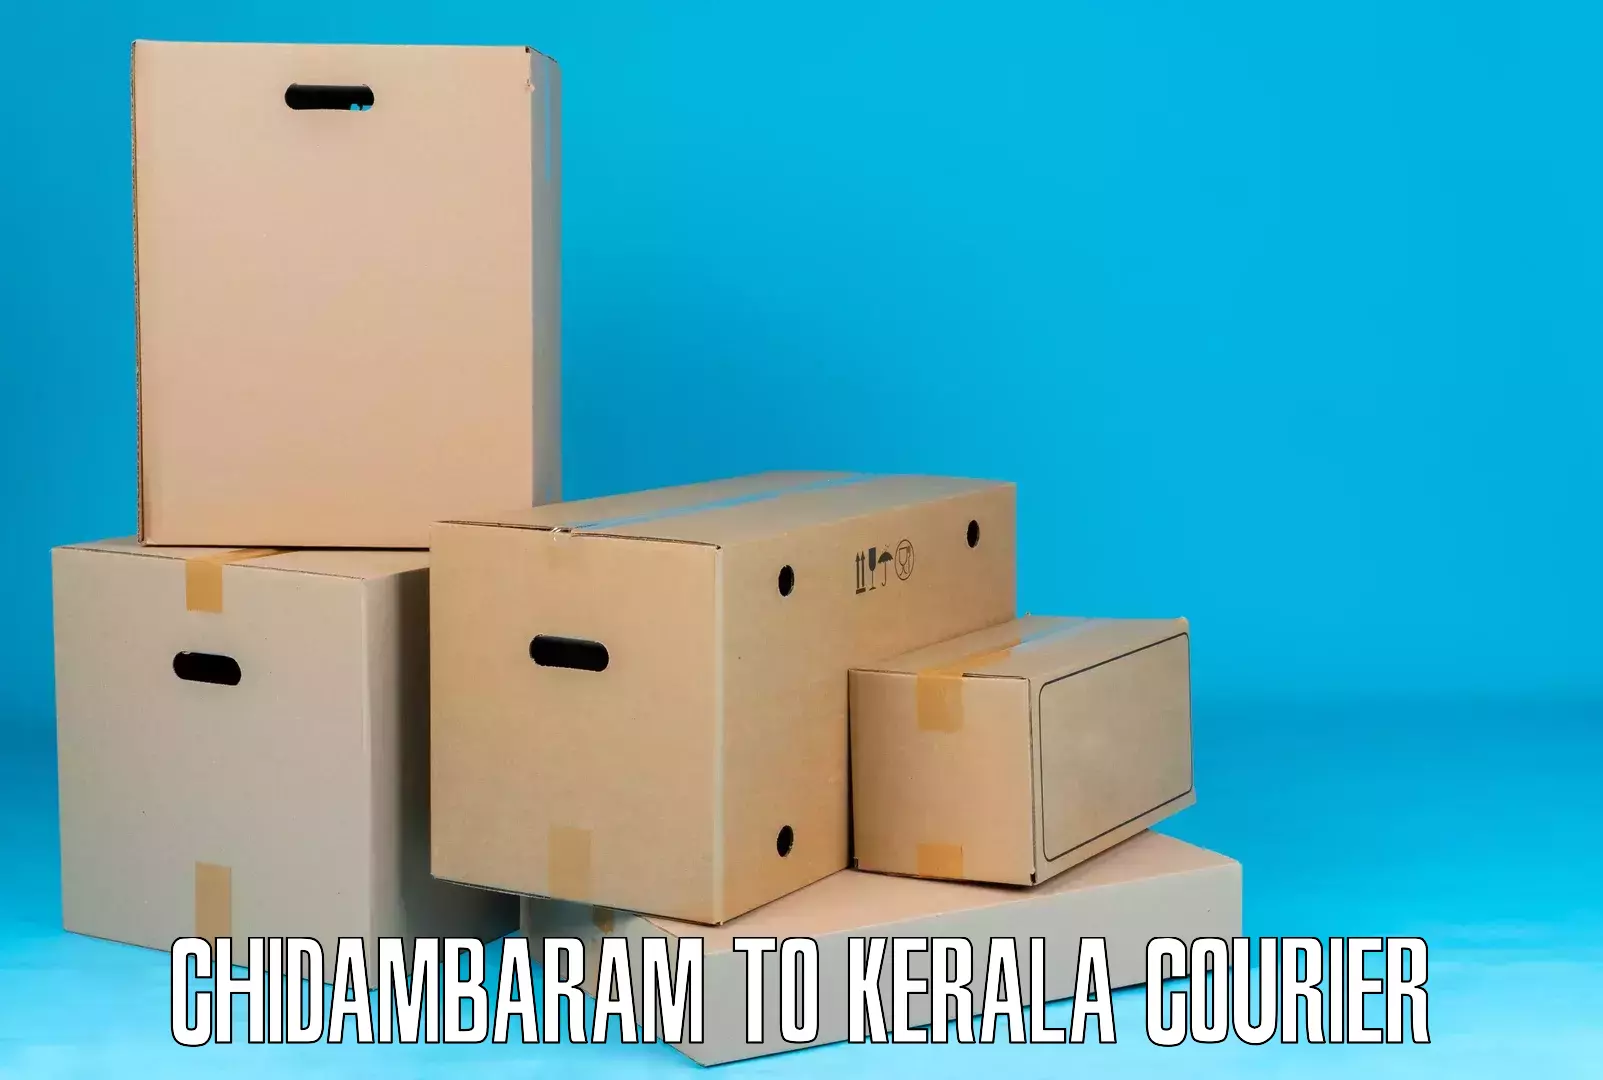 Local delivery service Chidambaram to Kozhikode